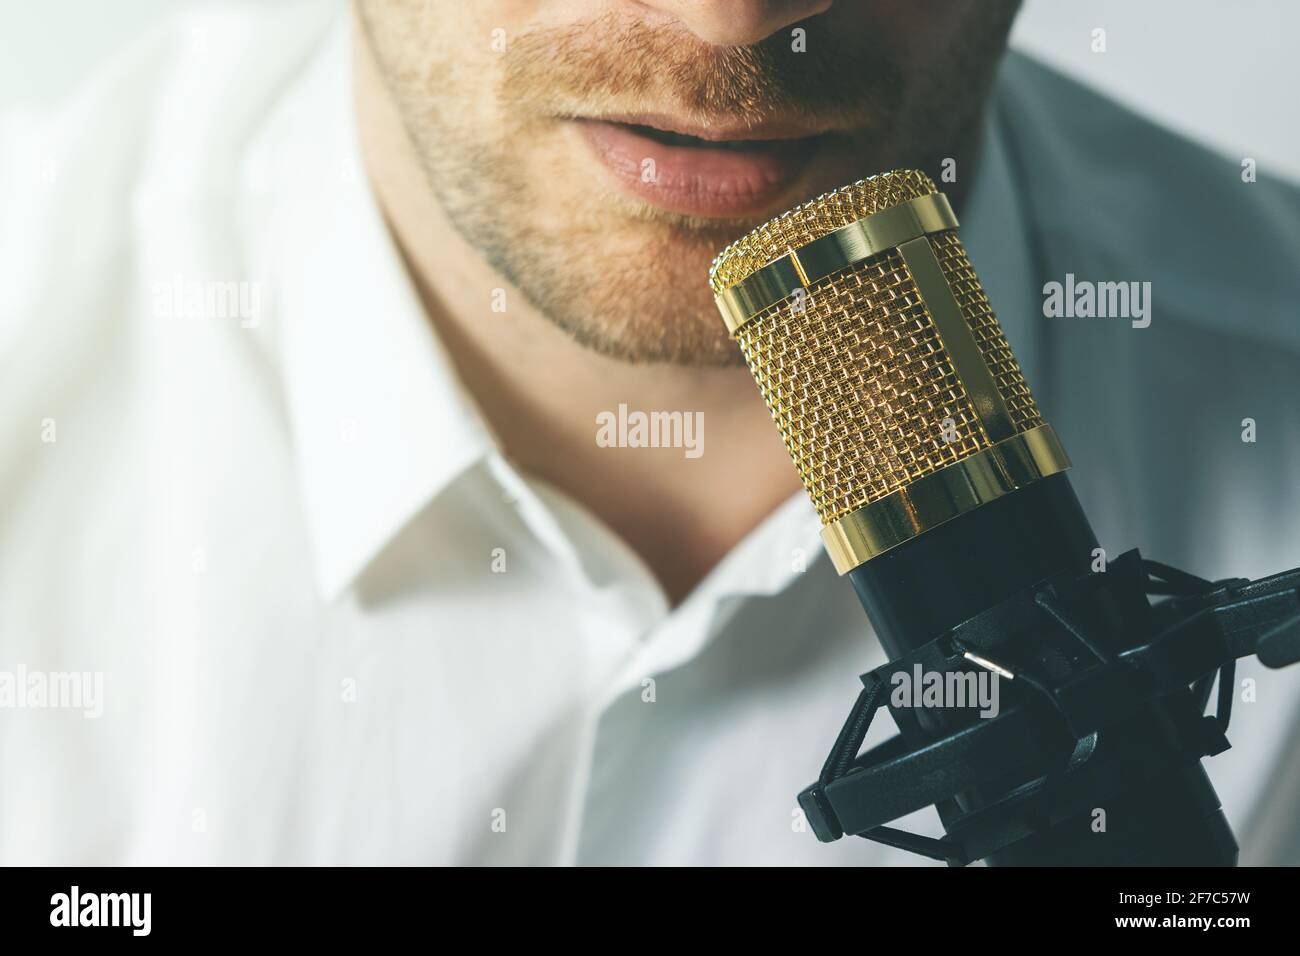 young man recording podcast. speaking in microphone closeup Stock Photo